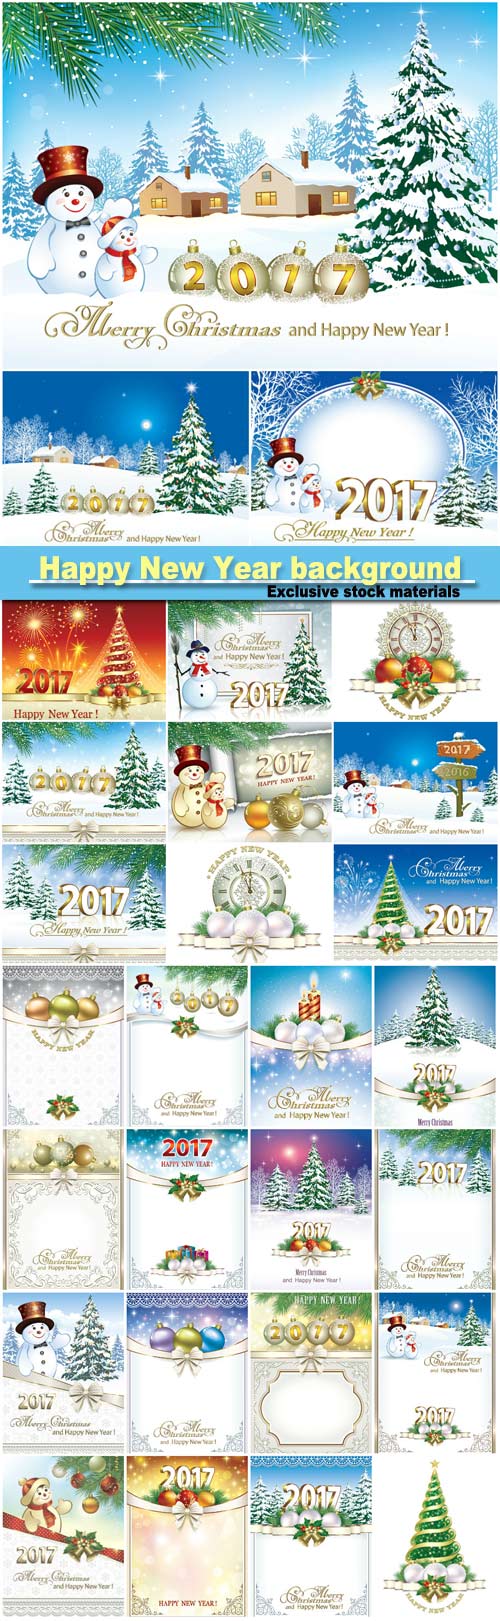 Happy new year 2017, Christmas design template 